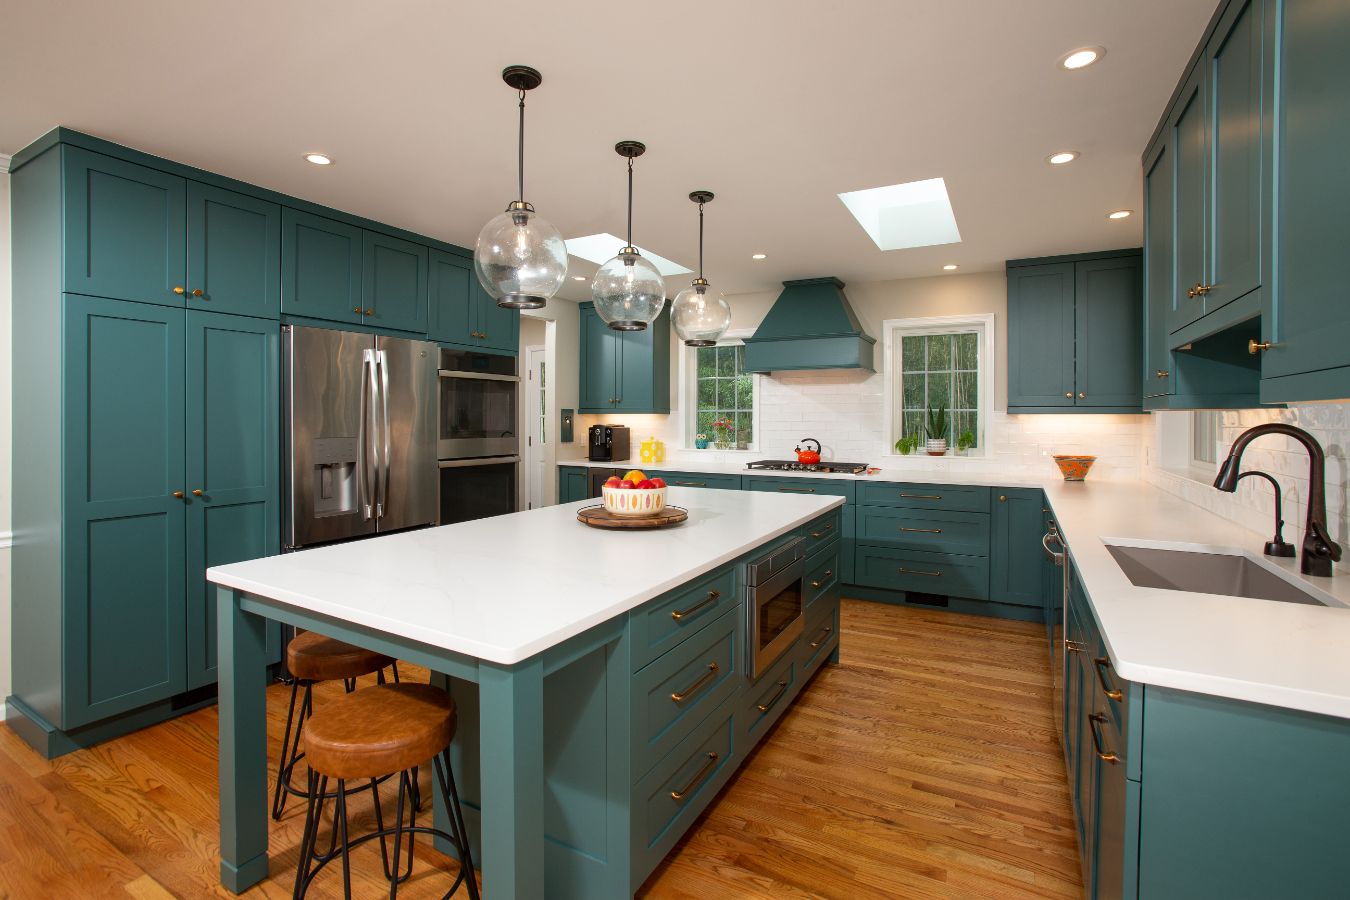 White Kitchen Countertops on Teal Cabinets with Brass and Black Hardware Accents - Rust Construction | Northern Virginia Kitchen Remodels